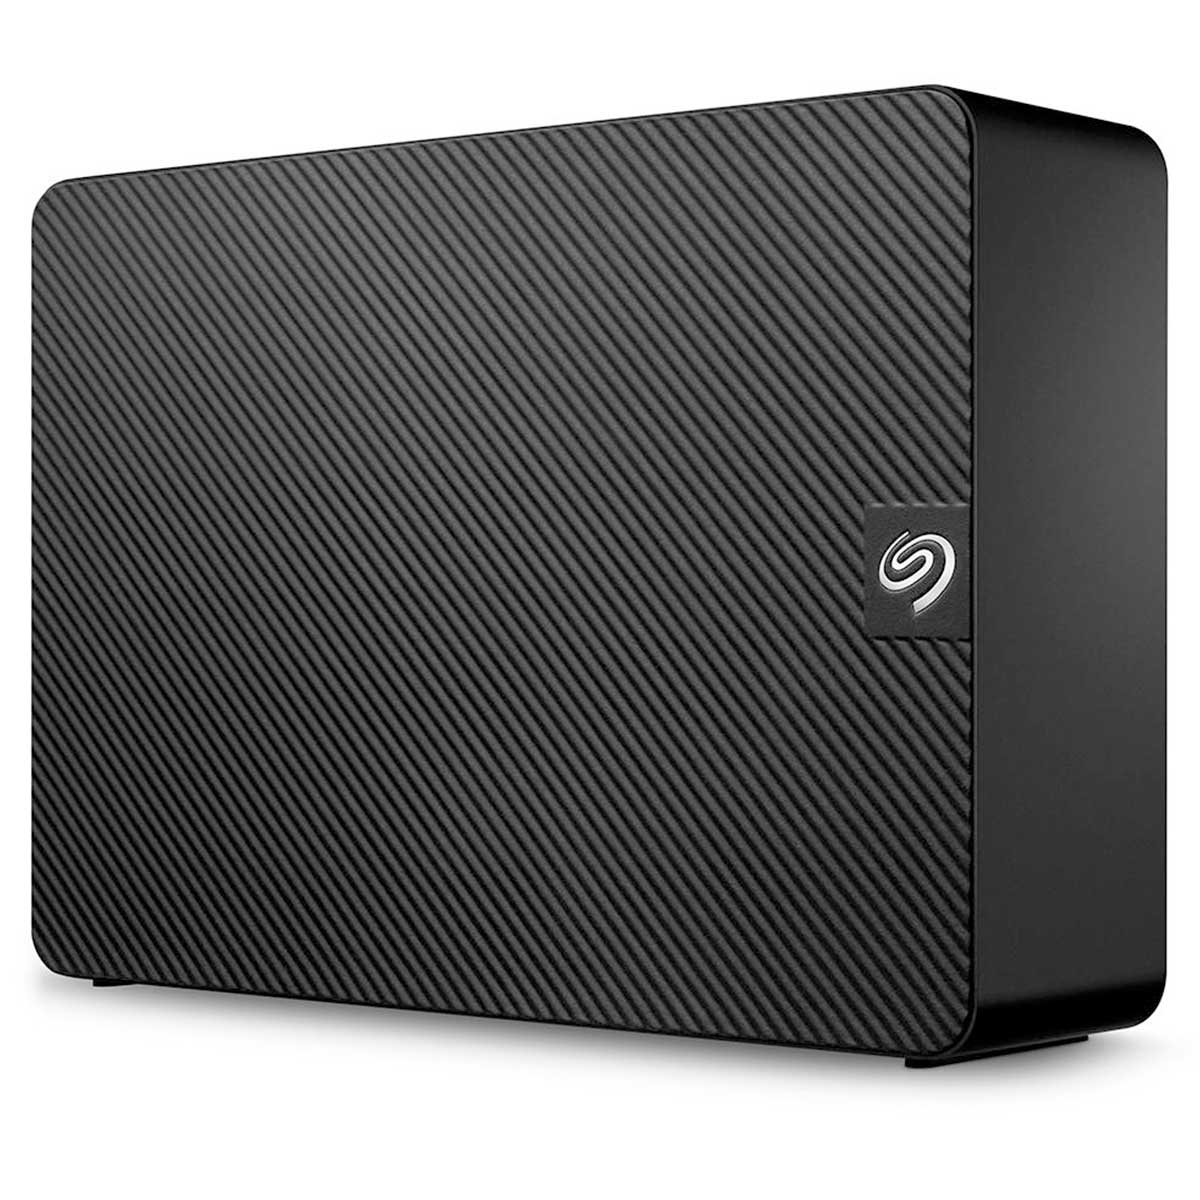 HD Externo 8TB Seagate Expansion - USB 3.0 - STKP8000400